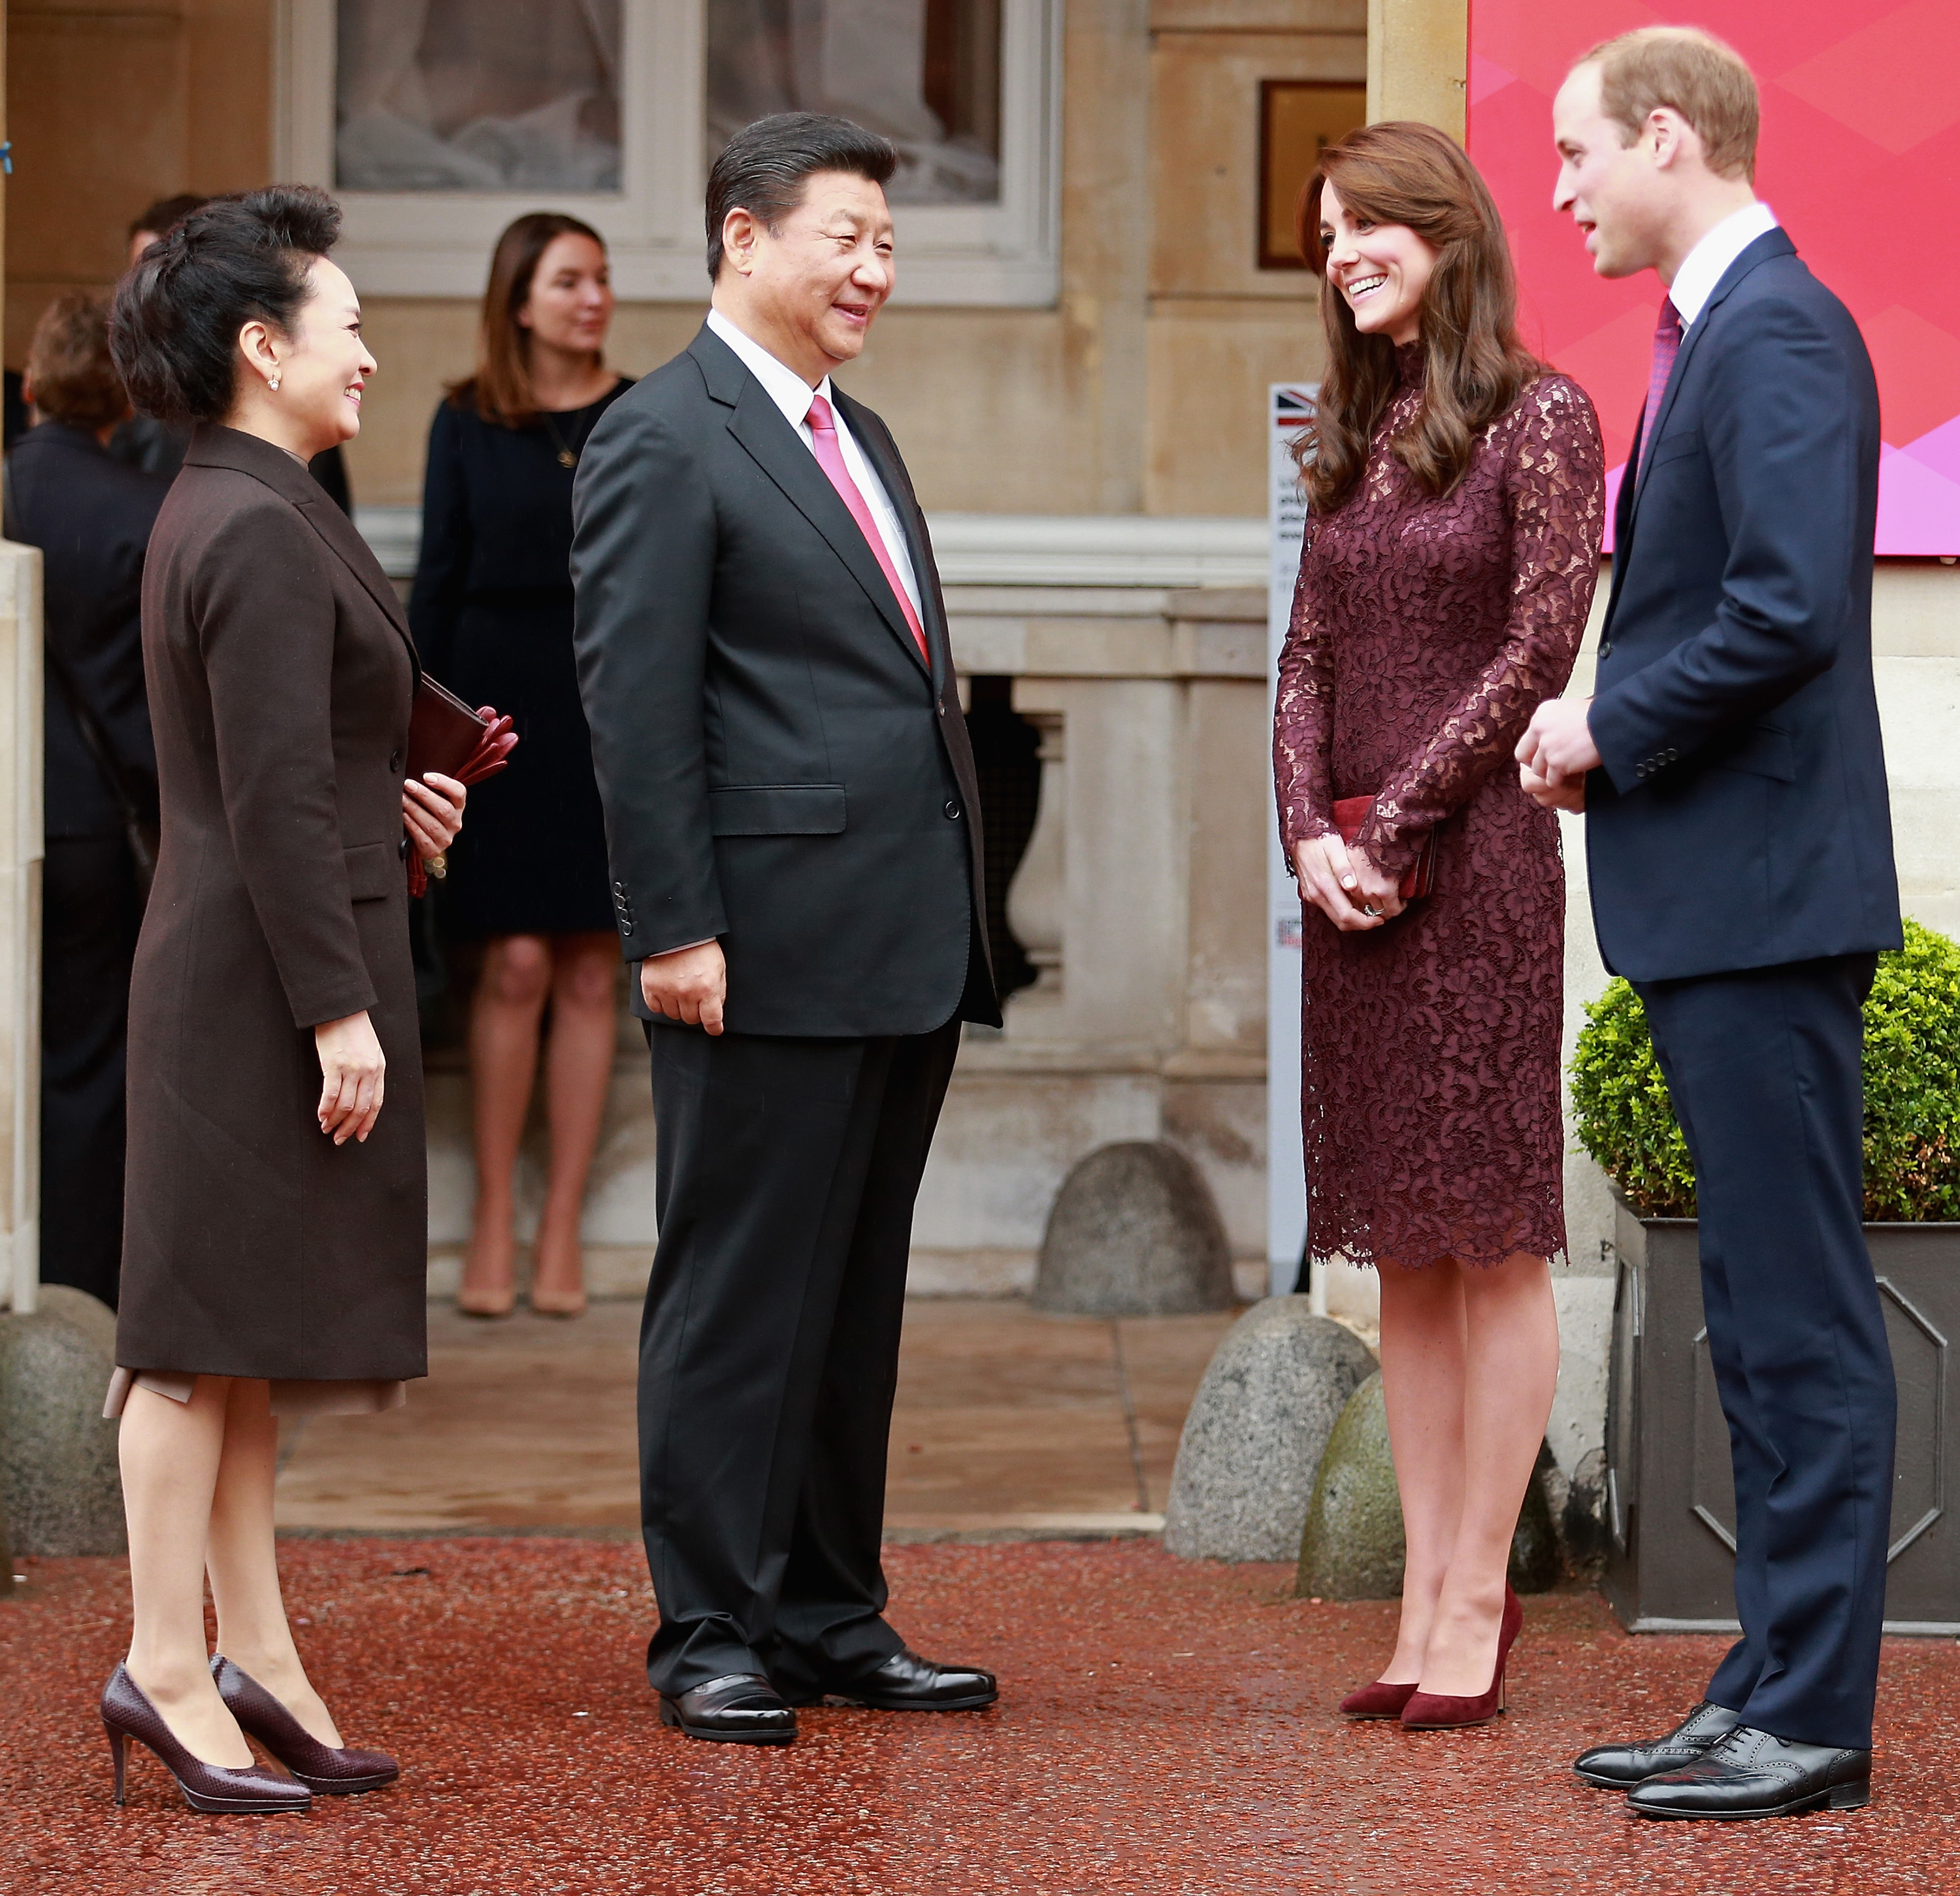 Prince William, Duke of Cambridge and Catherine, Duchess of Cambridge welcome the President of the Peoples Republic of China, Mr Xi Jinping and his wife, Madame Peng Liyuan at  a GREAT Britain Creative Event at Lancaster House on Oct. 21, 2015 in London.